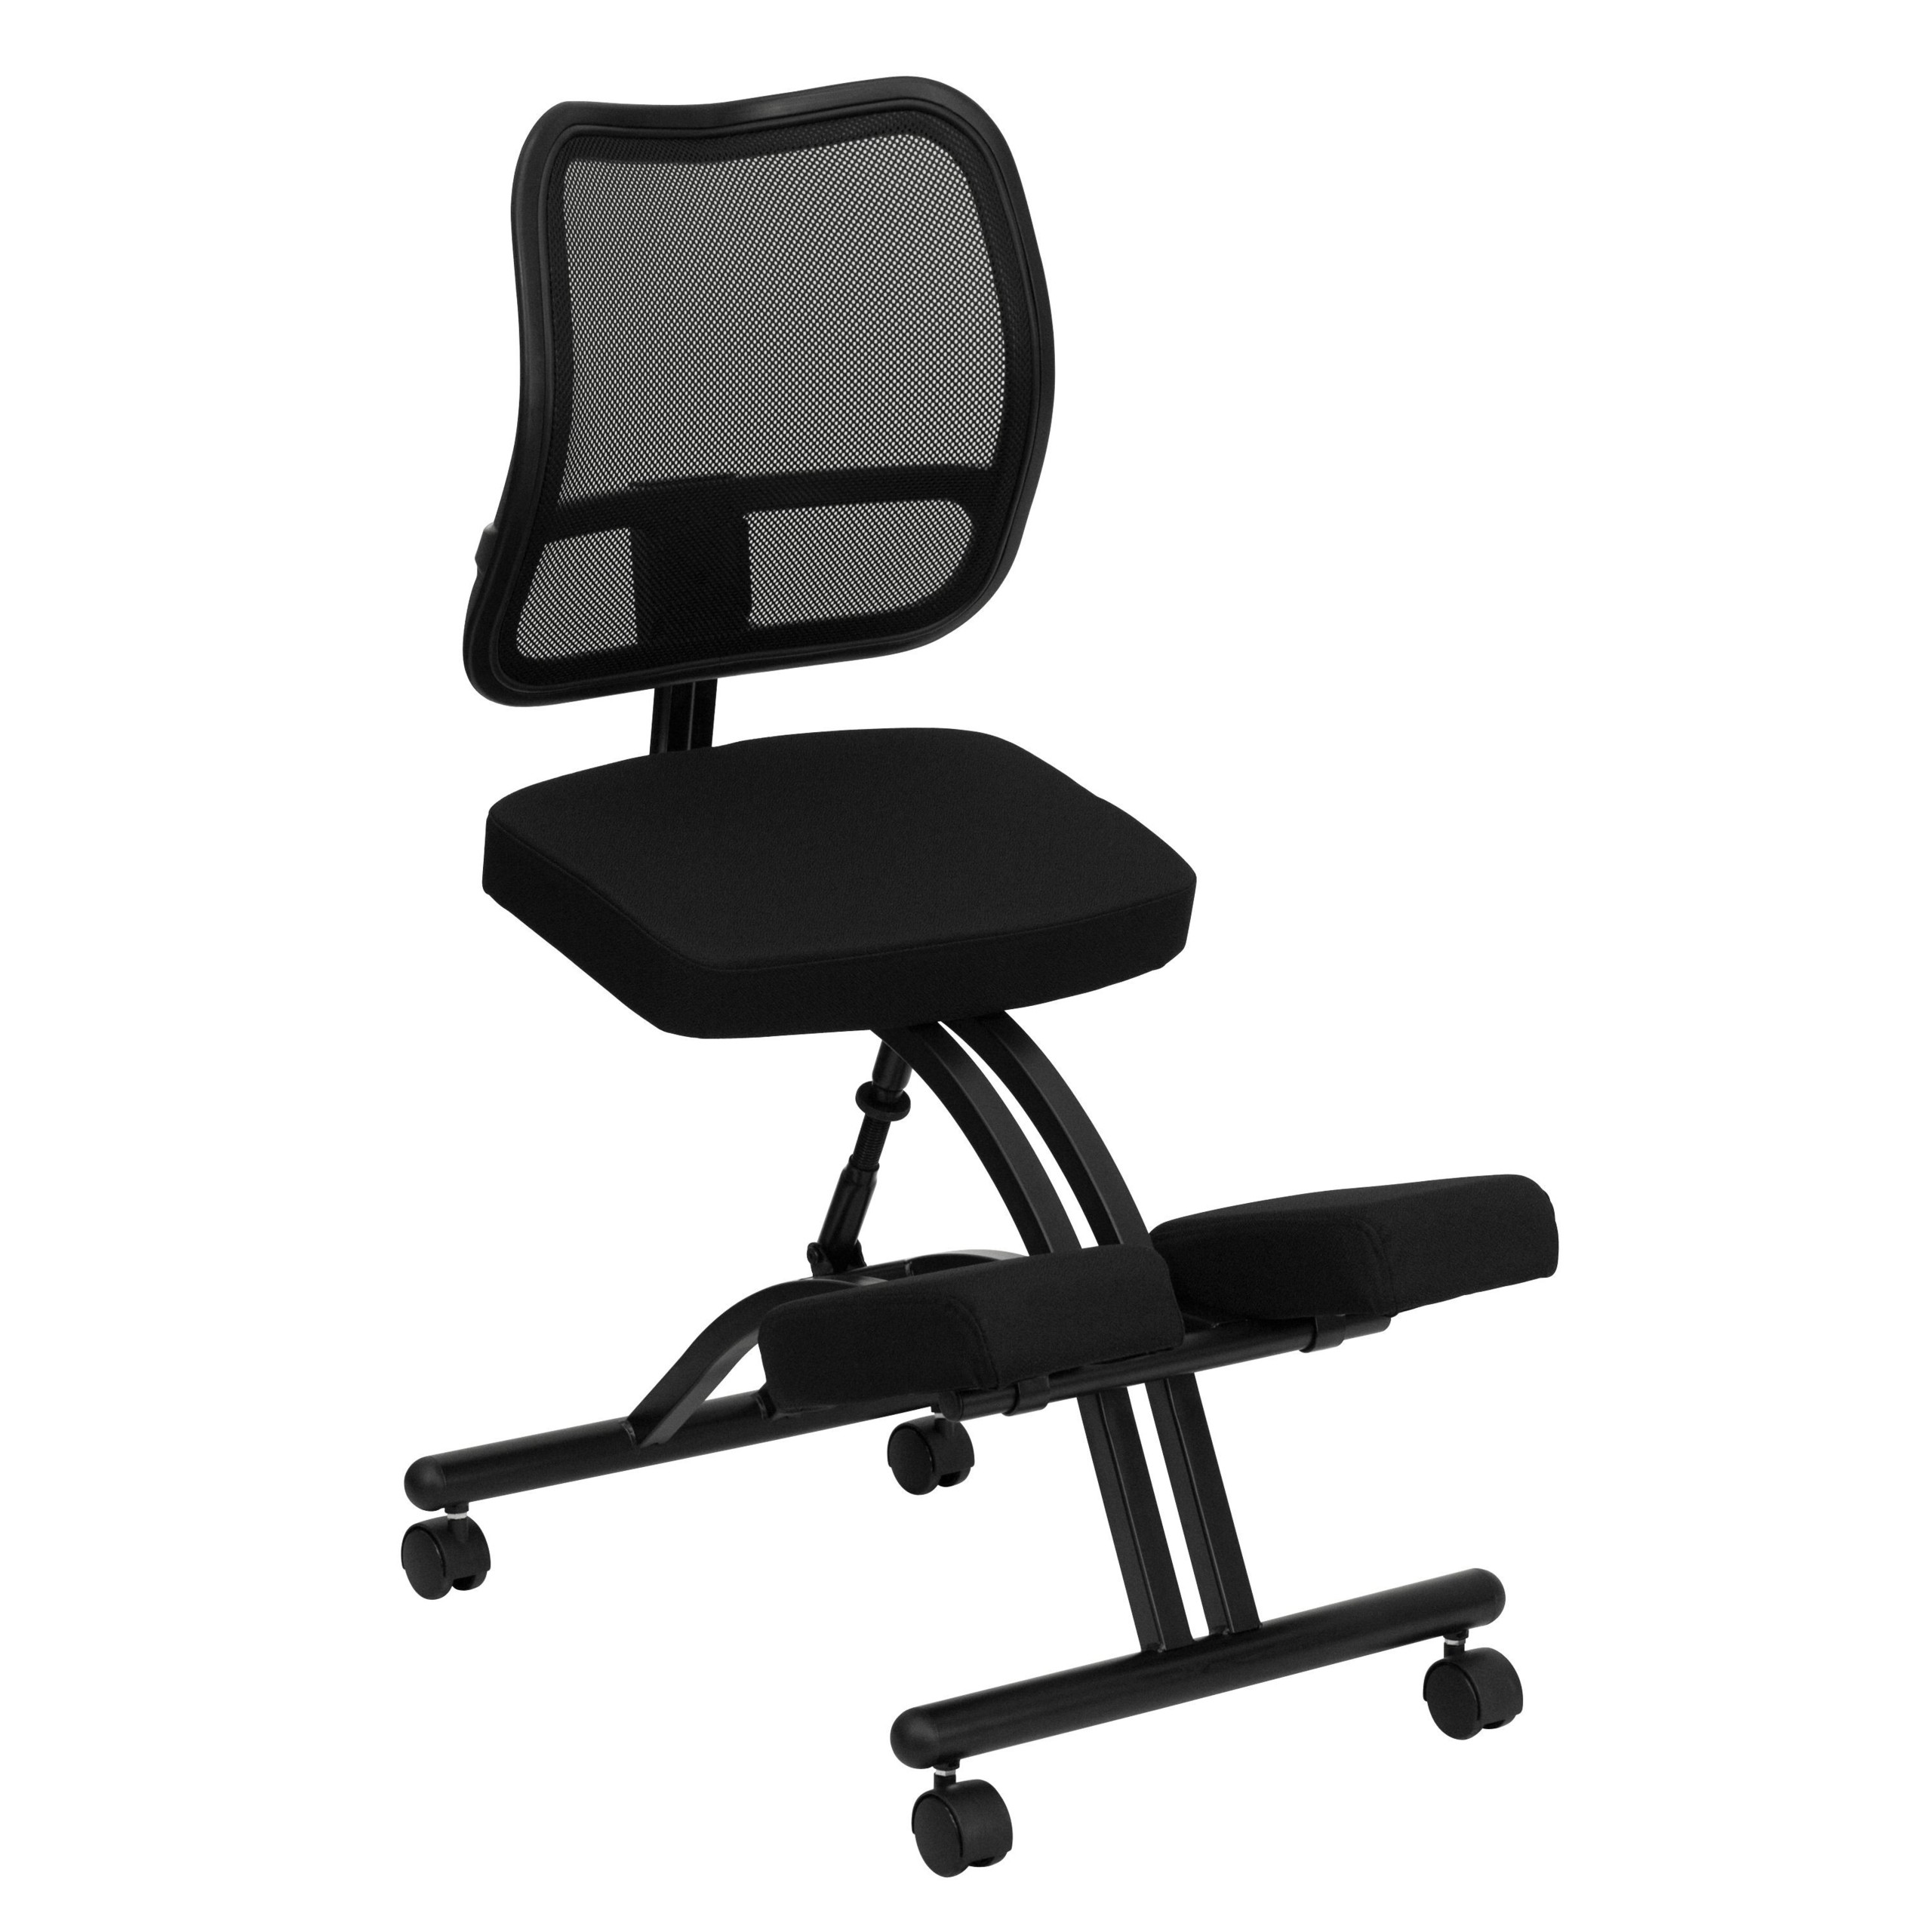 Woolbright Mobile Mid-Back Height Adjustable Kneeling Chair with Dual Wheel